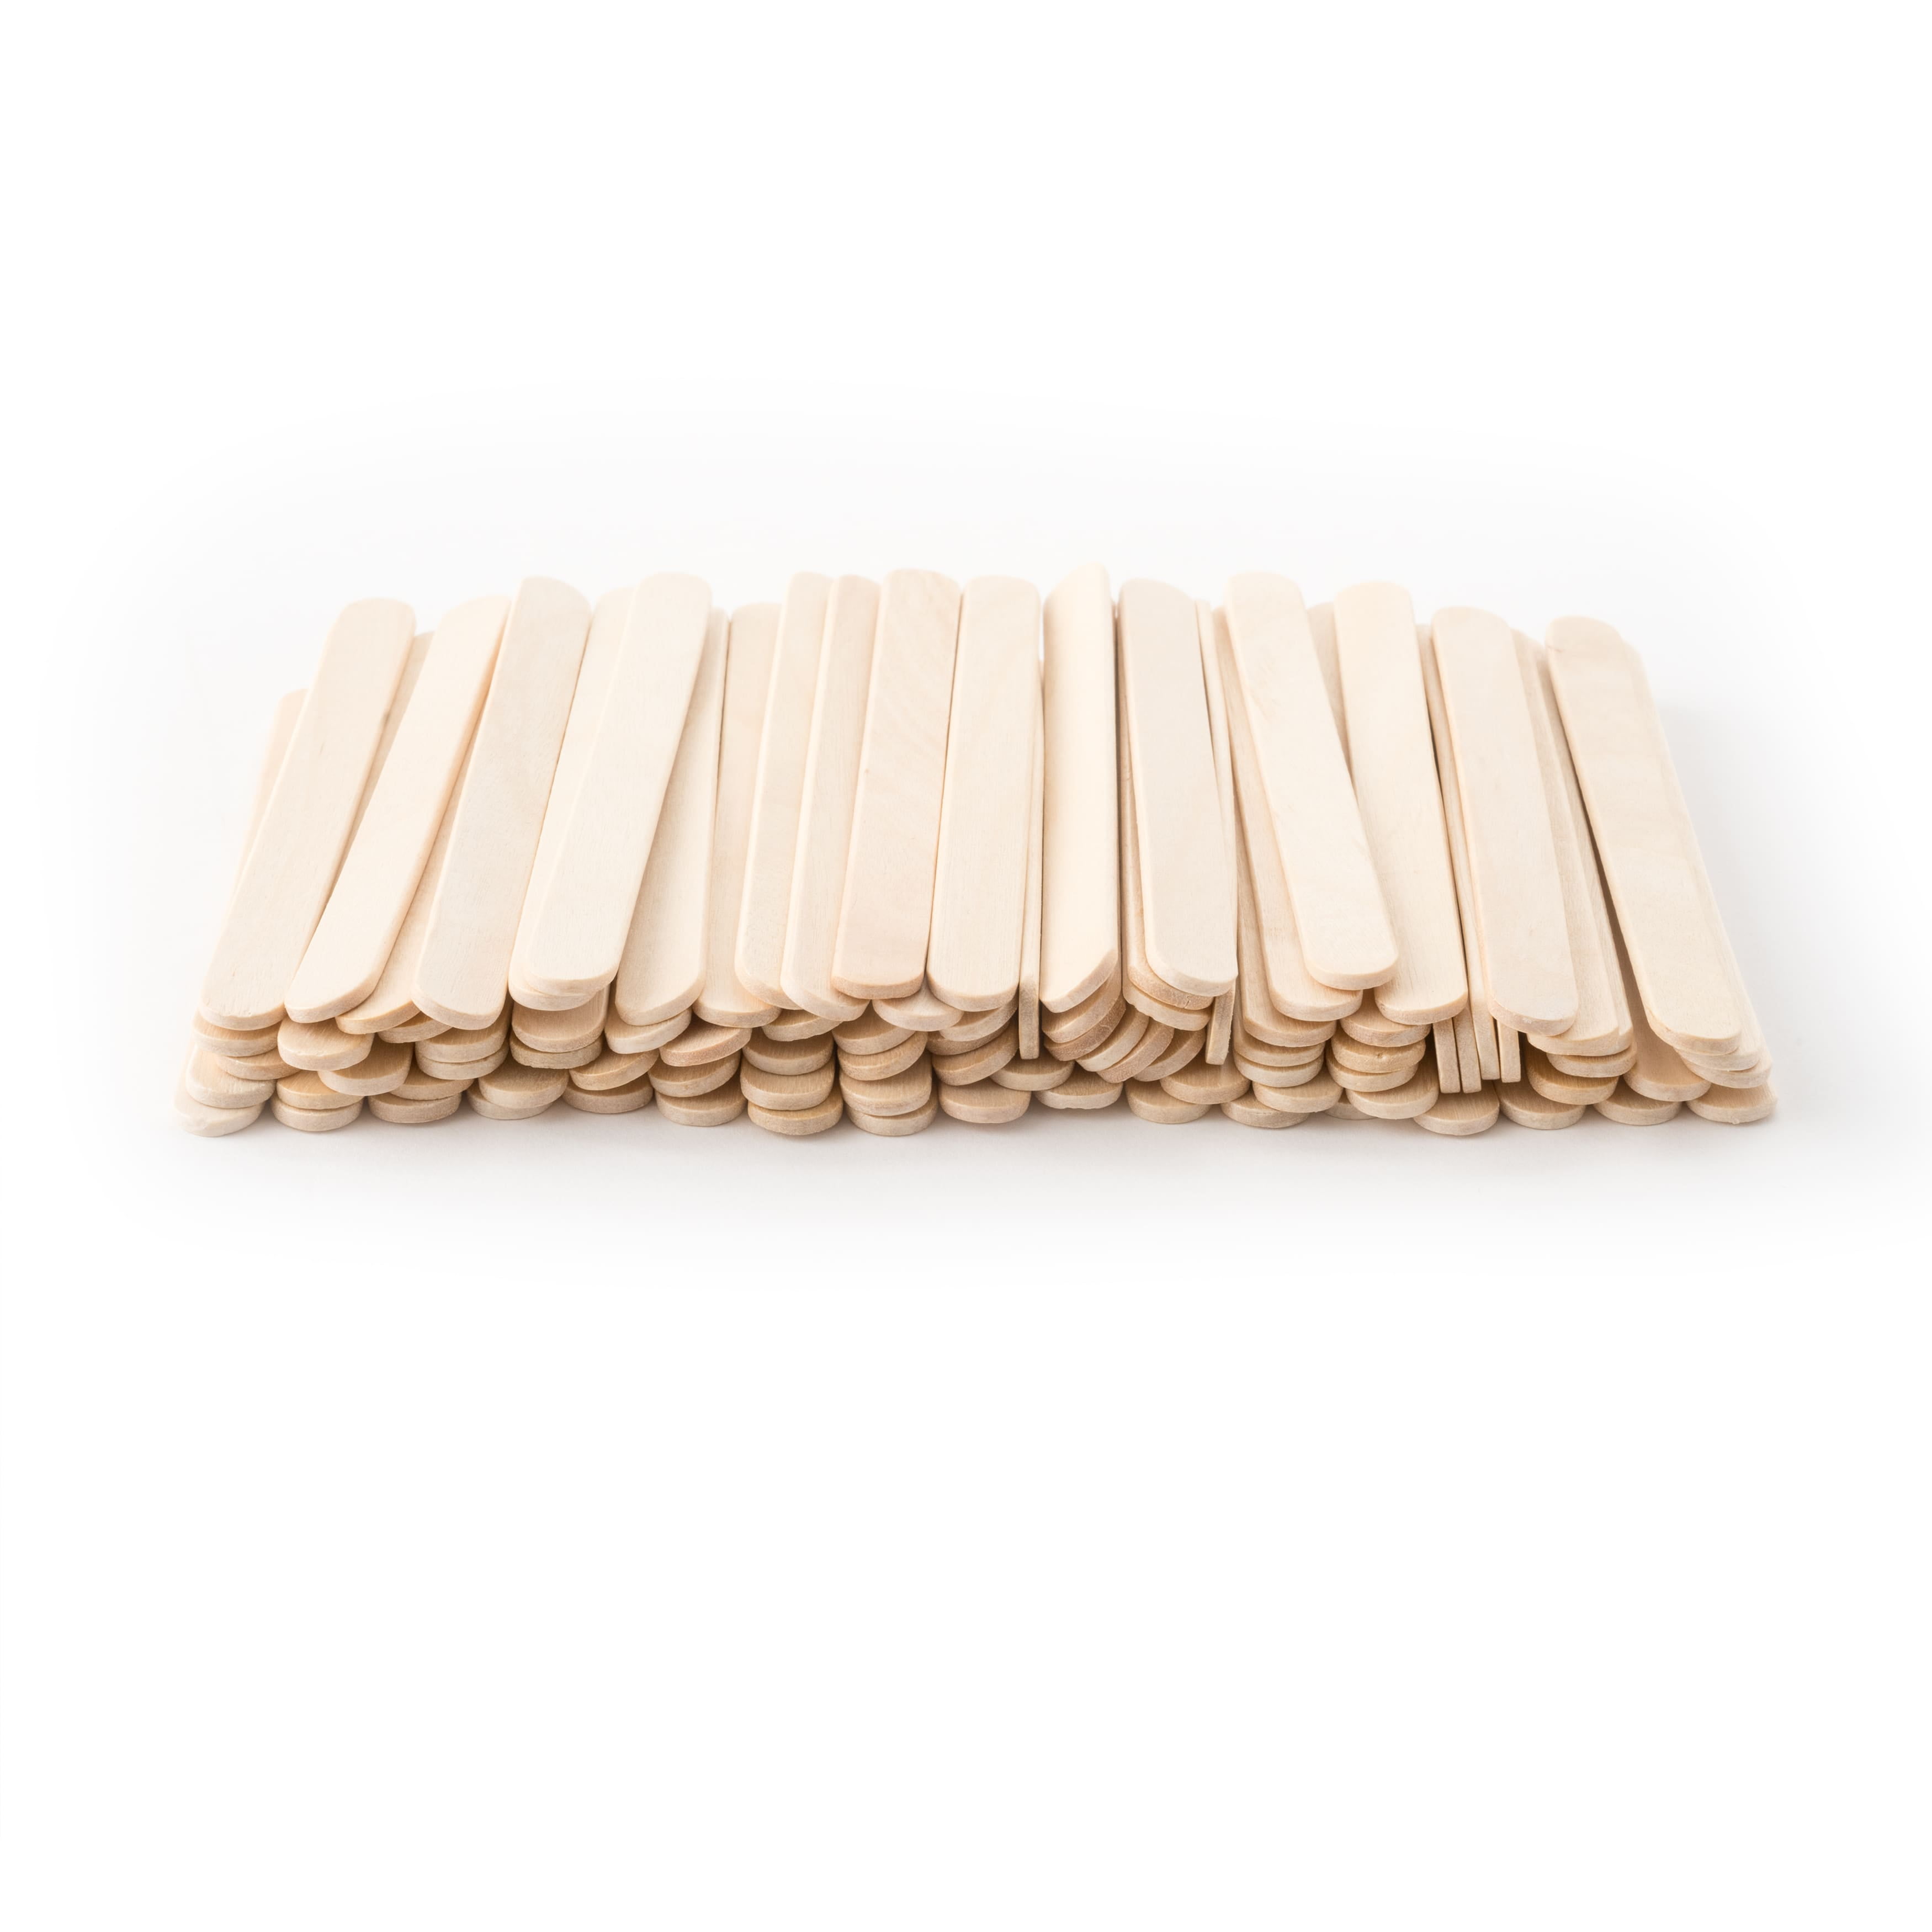 12 Packs: 1,000 ct. (12,000 total) 4.5 Wood Craft Sticks by Creatology™